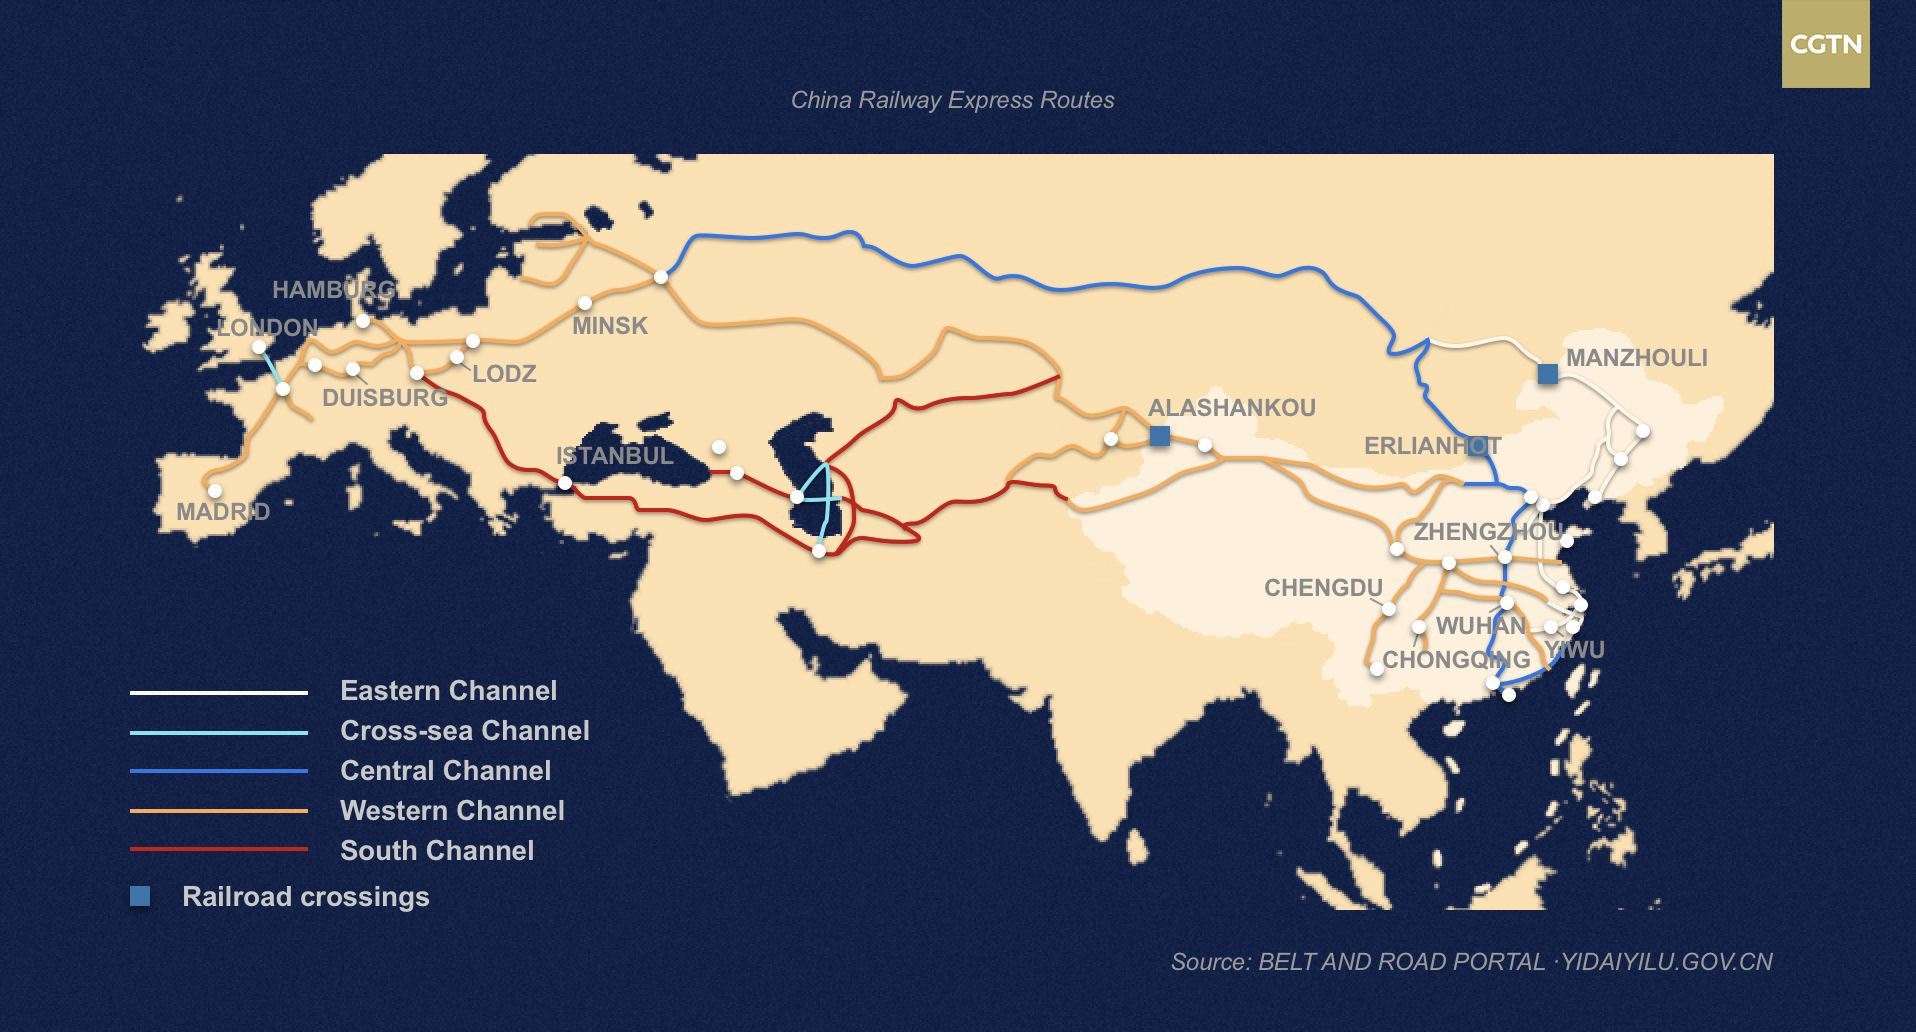 Railways Along the Belt and Road | Tour world's longest freight route